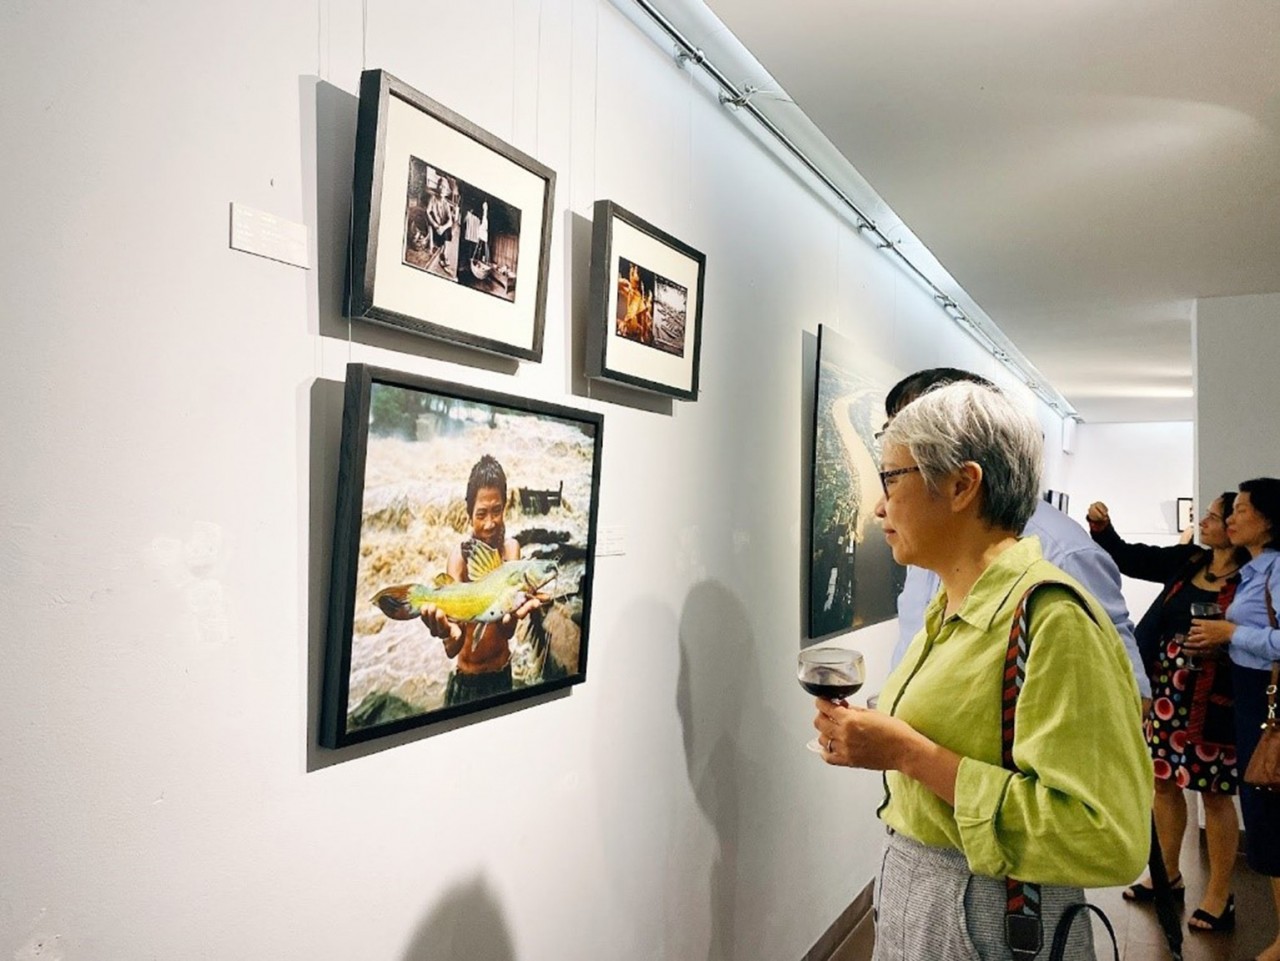 An exhibition of 28 images depicting a photographer’s 4,200km journey along the Mekong River goes on display in Đà Nẵng.